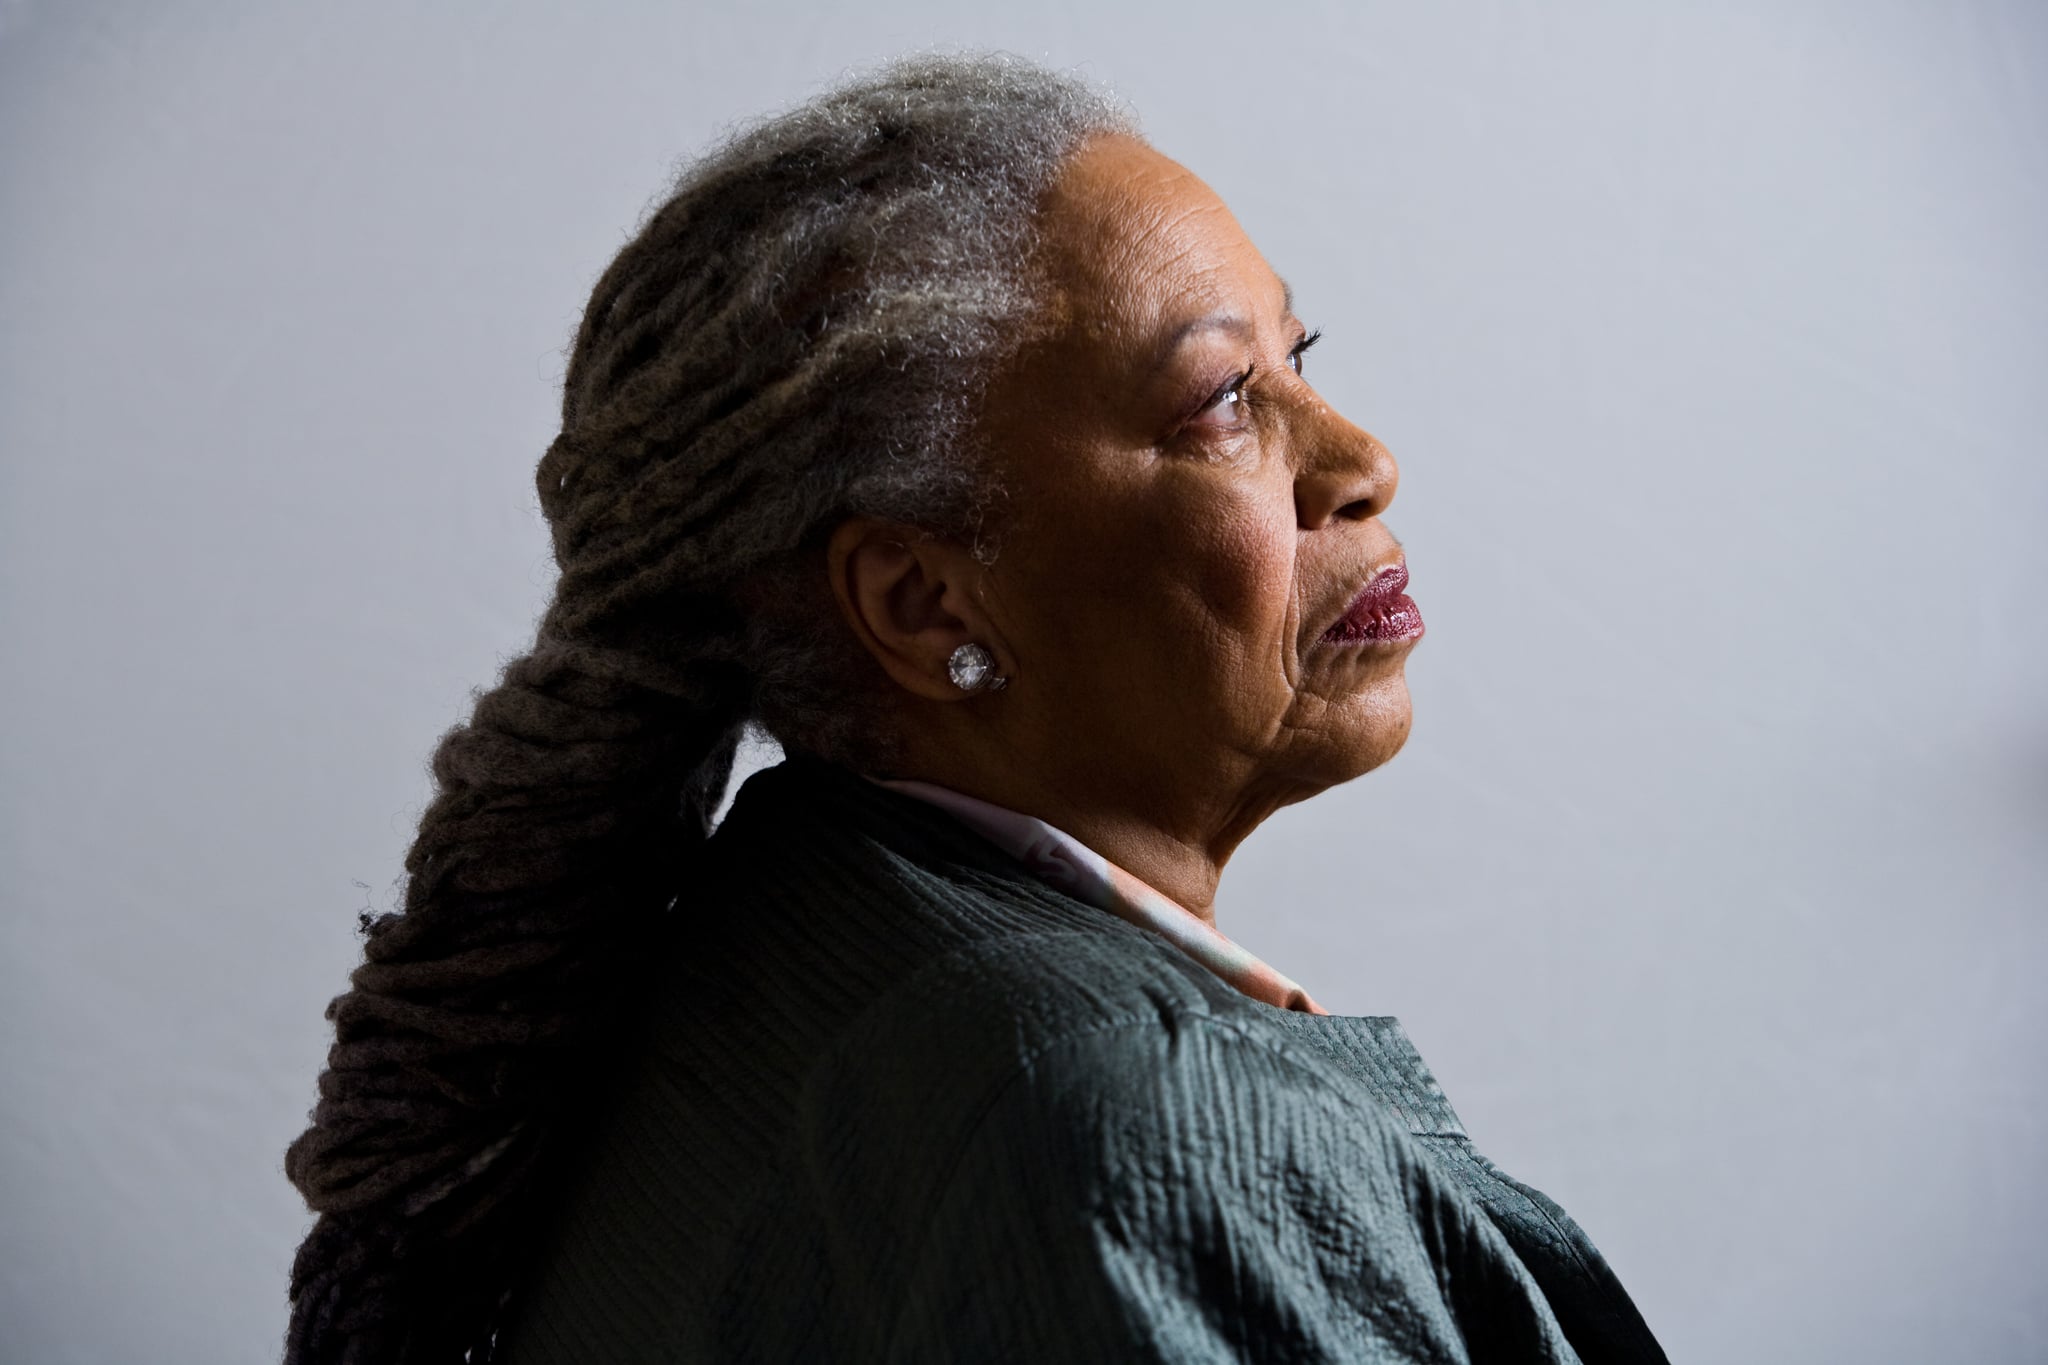 Pulitzer prize winning author, Toni Morrison, 77, is photographed in her New York apartment .Toni Morrison, in her New York apartment. (Photo by Timothy Fadek/Corbis via Getty Images)